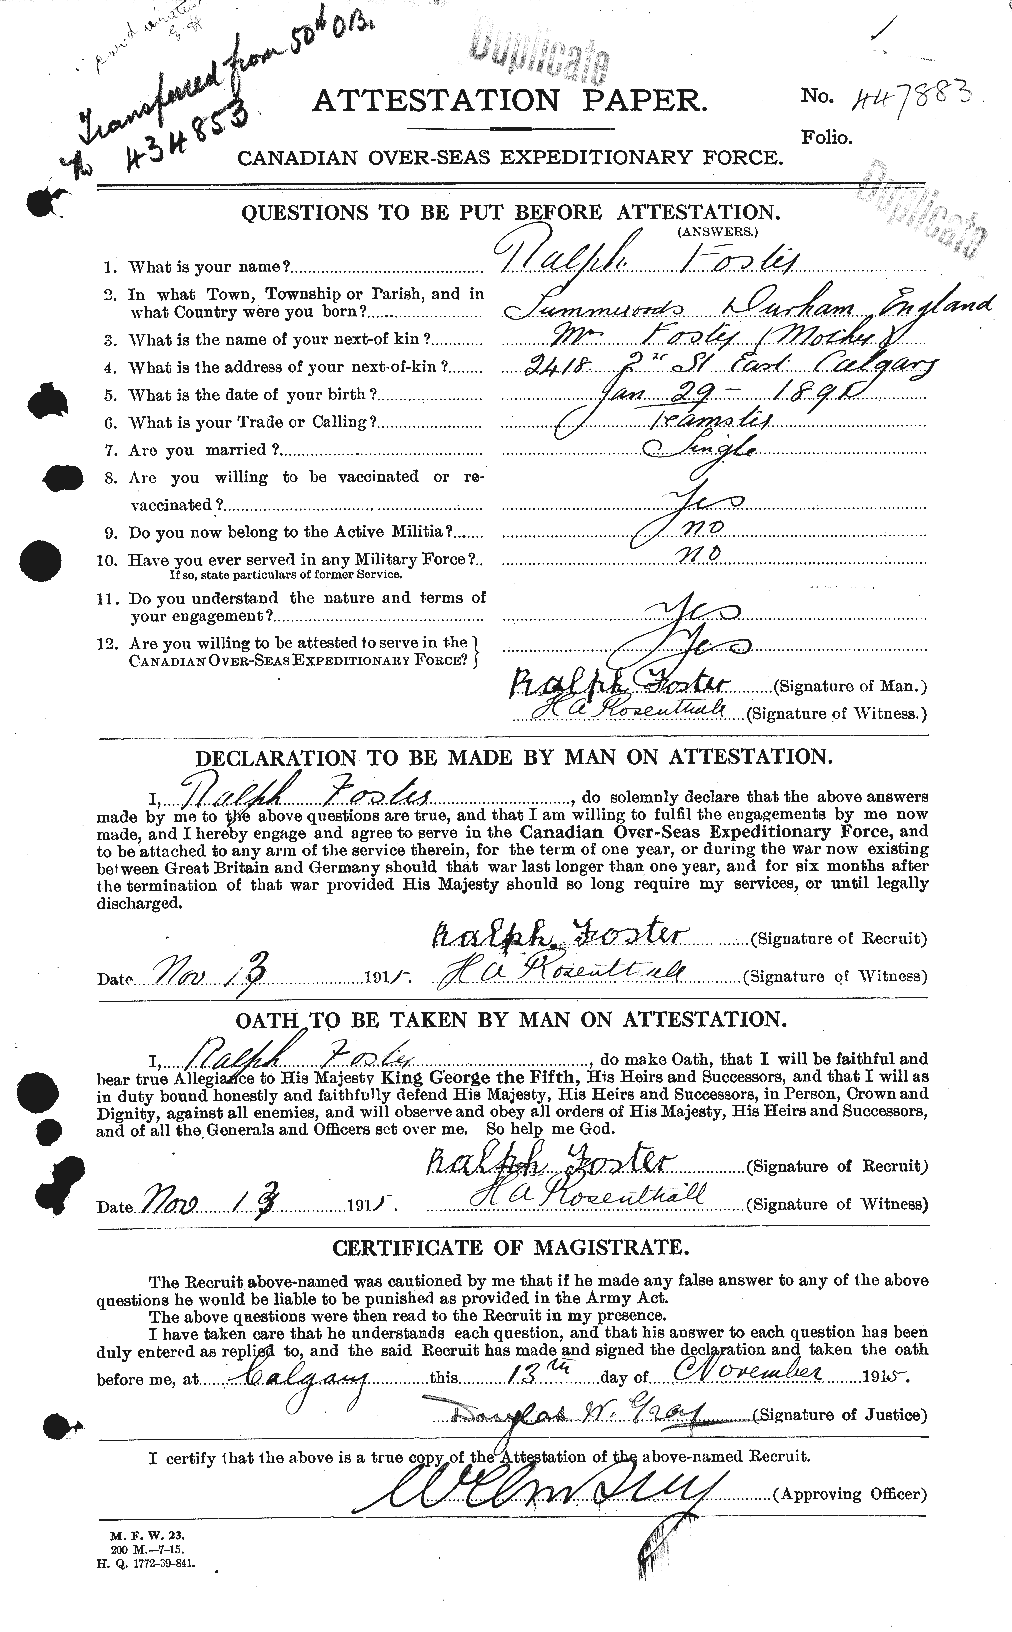 Personnel Records of the First World War - CEF 333448a